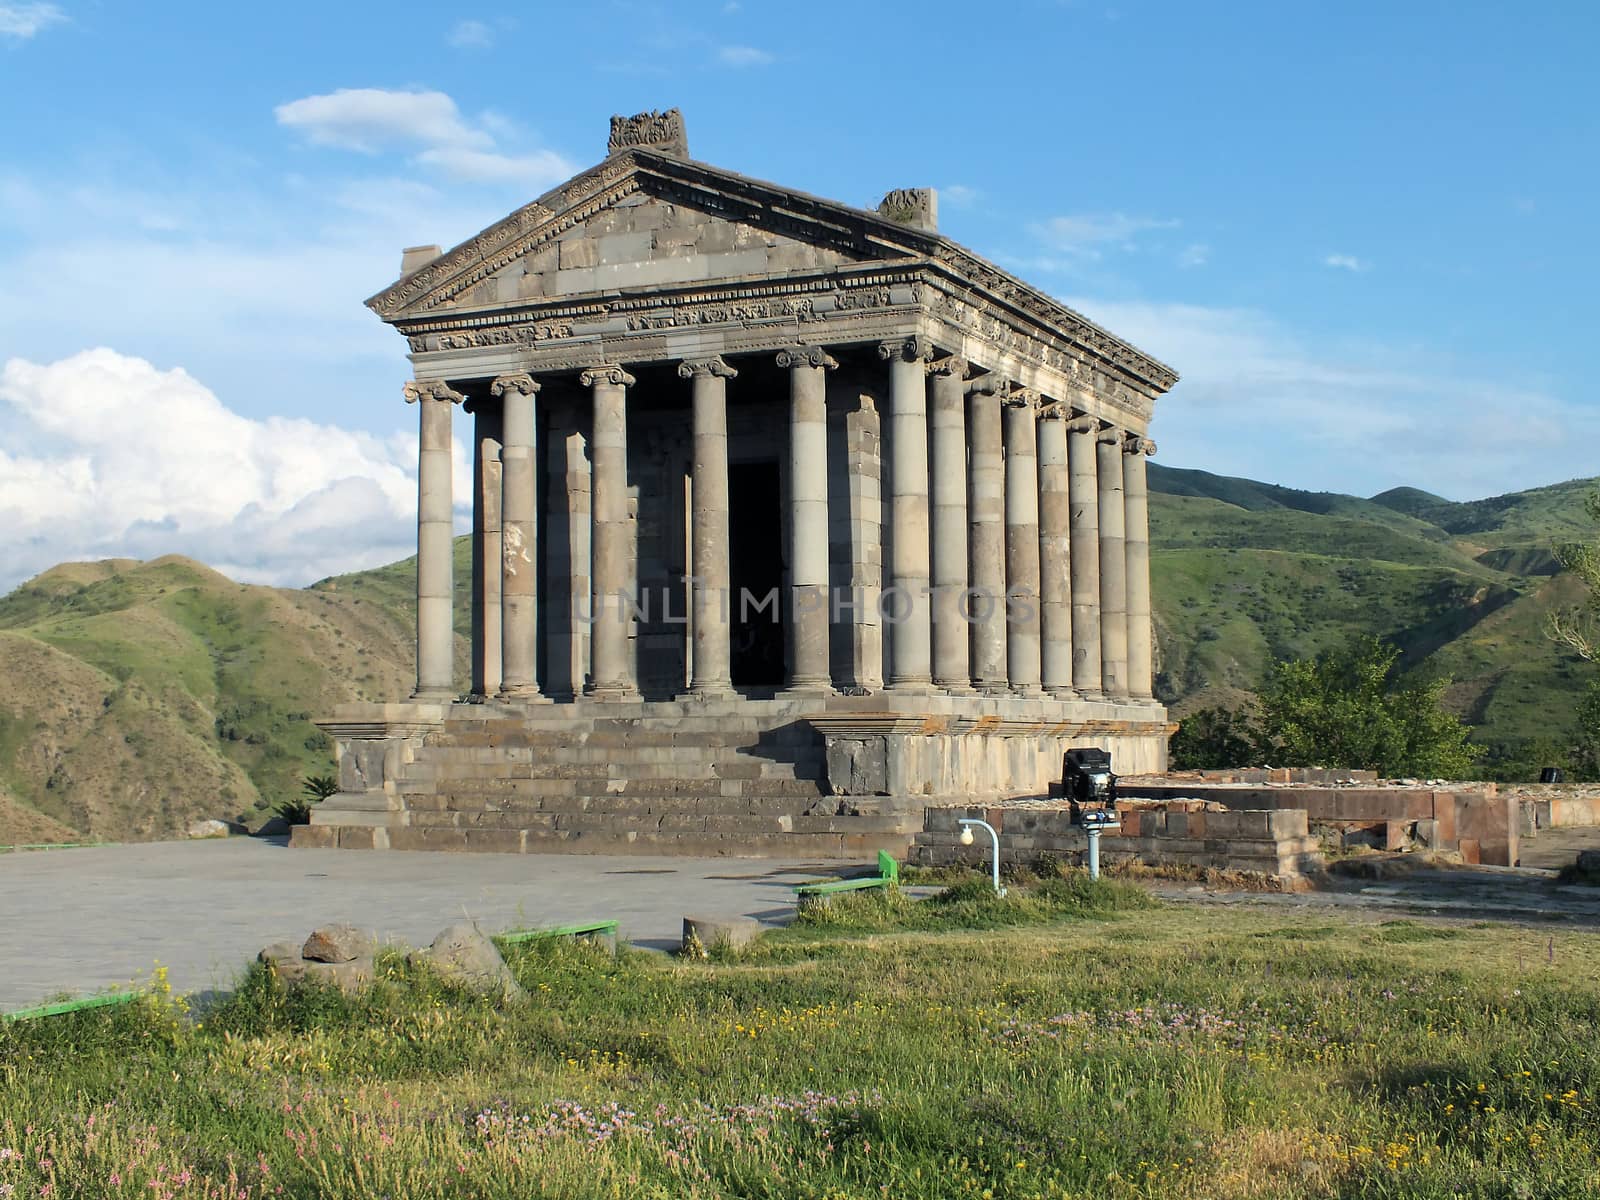 The Temple of Mithra, commonly referred to as Garni Temple, is was rebuilt by the Soviets in 1949. It is the only wholly preserved example of Hellenistic architecture in Armenia.